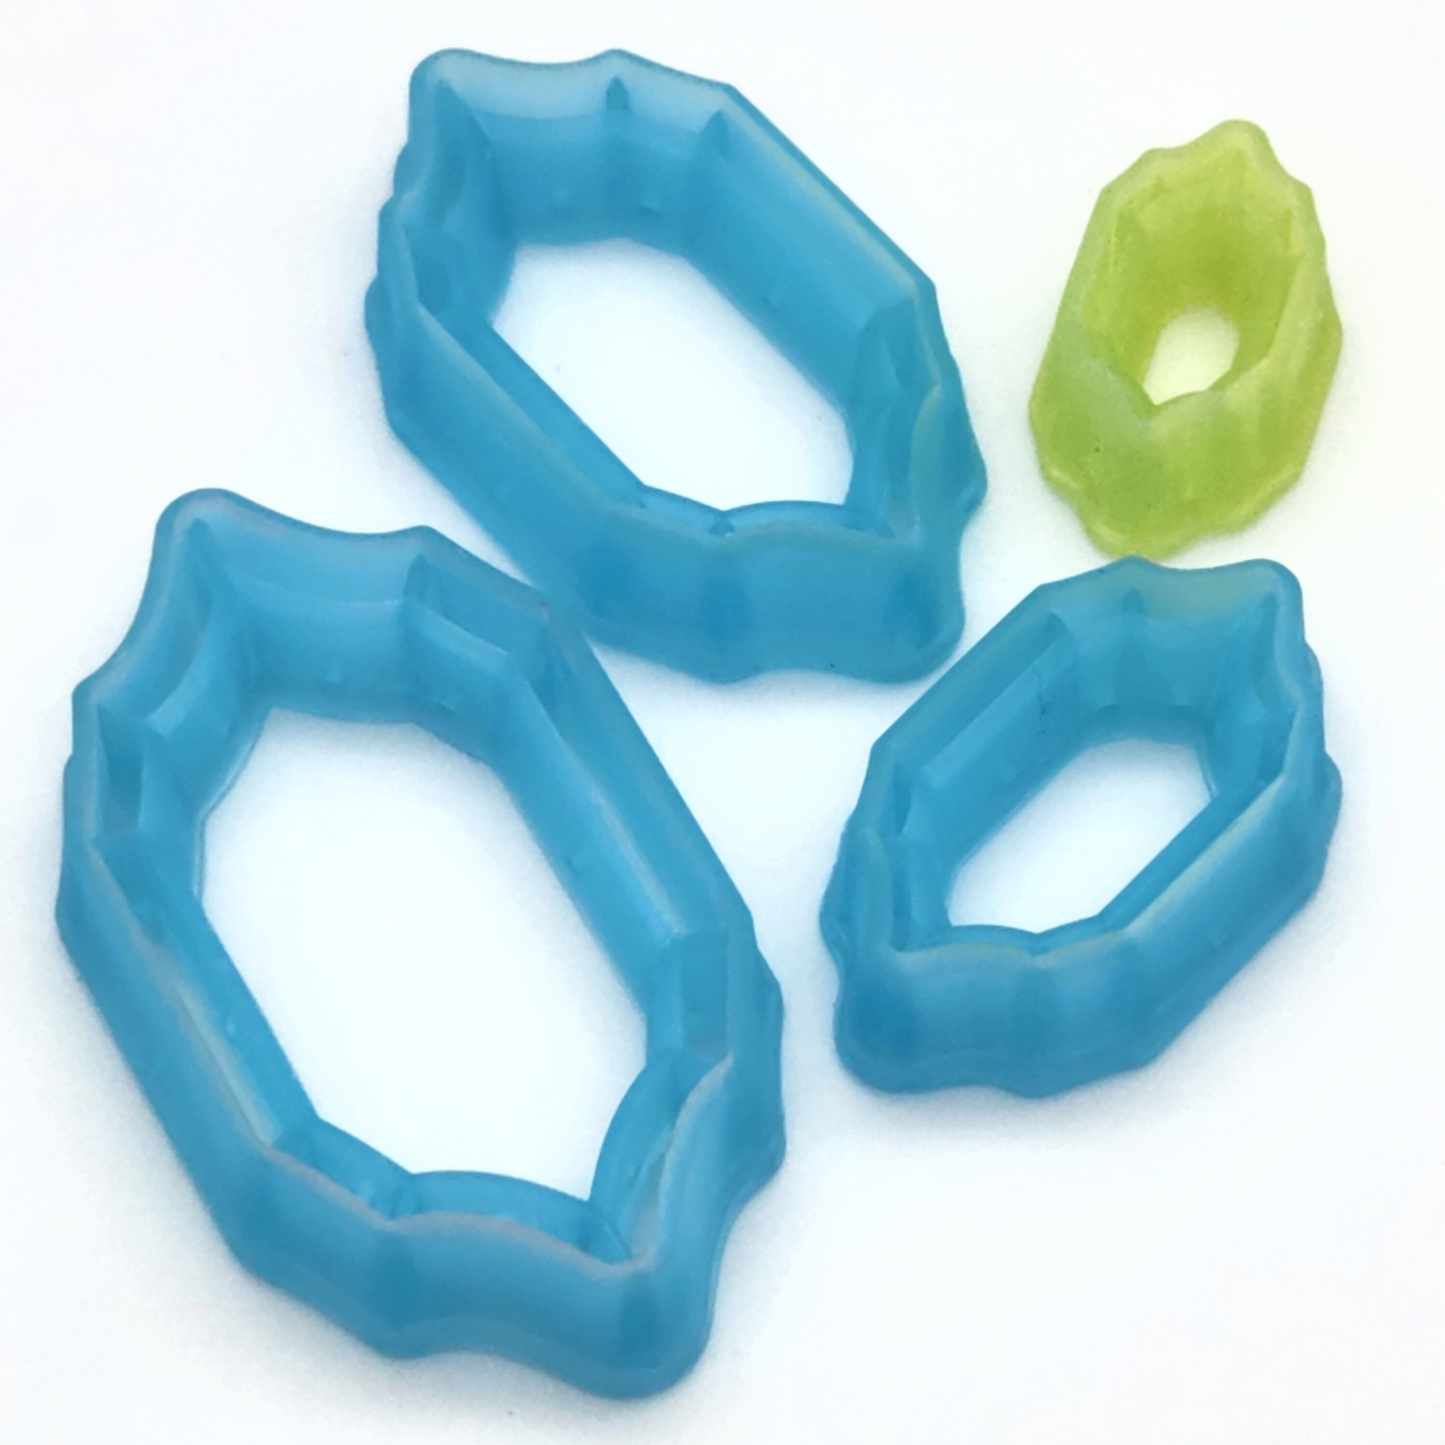 3D Printed Sharp Edge Sarah Amulet Shape Polymer Clay Cutters